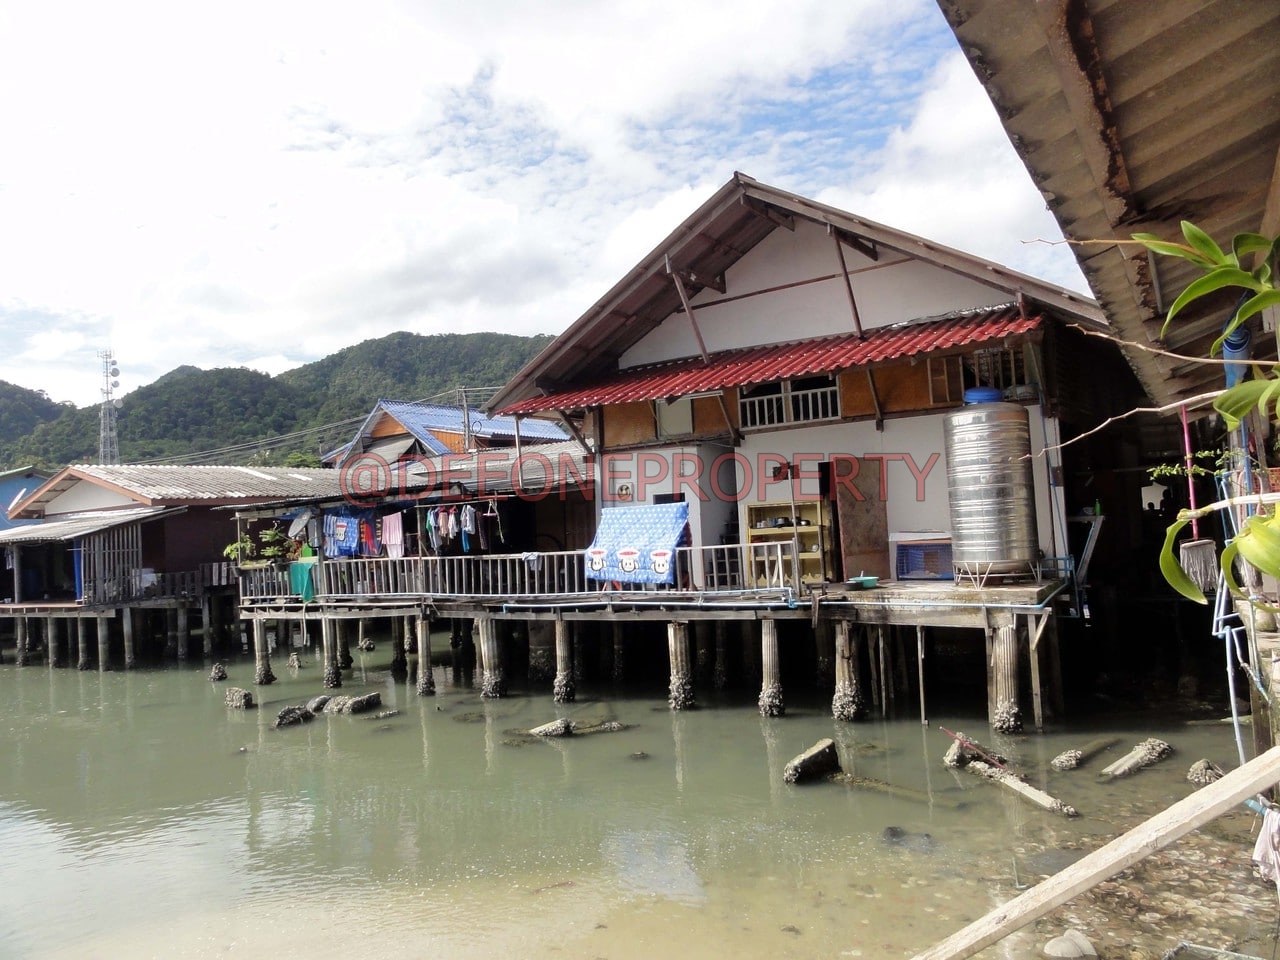 Double House with Shop on Stilts – South West Coast, Koh Chang